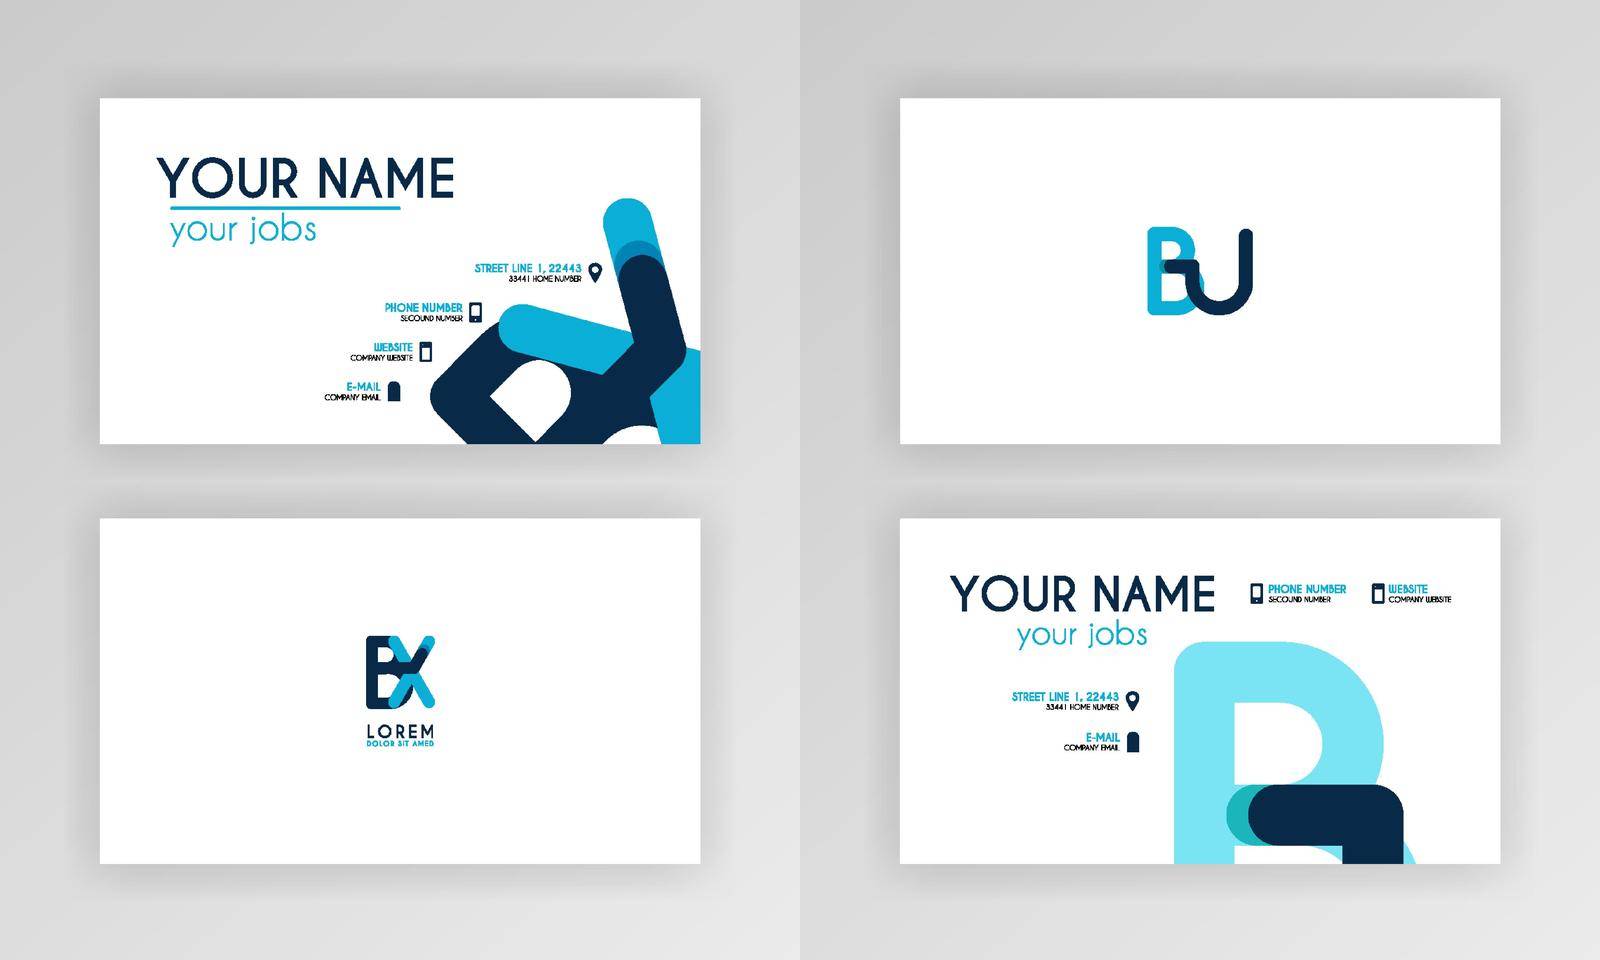 Blue Business Card Template. Simple Identity Card Design With Alphabet Logo And Slash Accent Decoration. For Corporate, Company, Professional, Business, Advertising, Public Relations, Brochure, Poster by yayimage